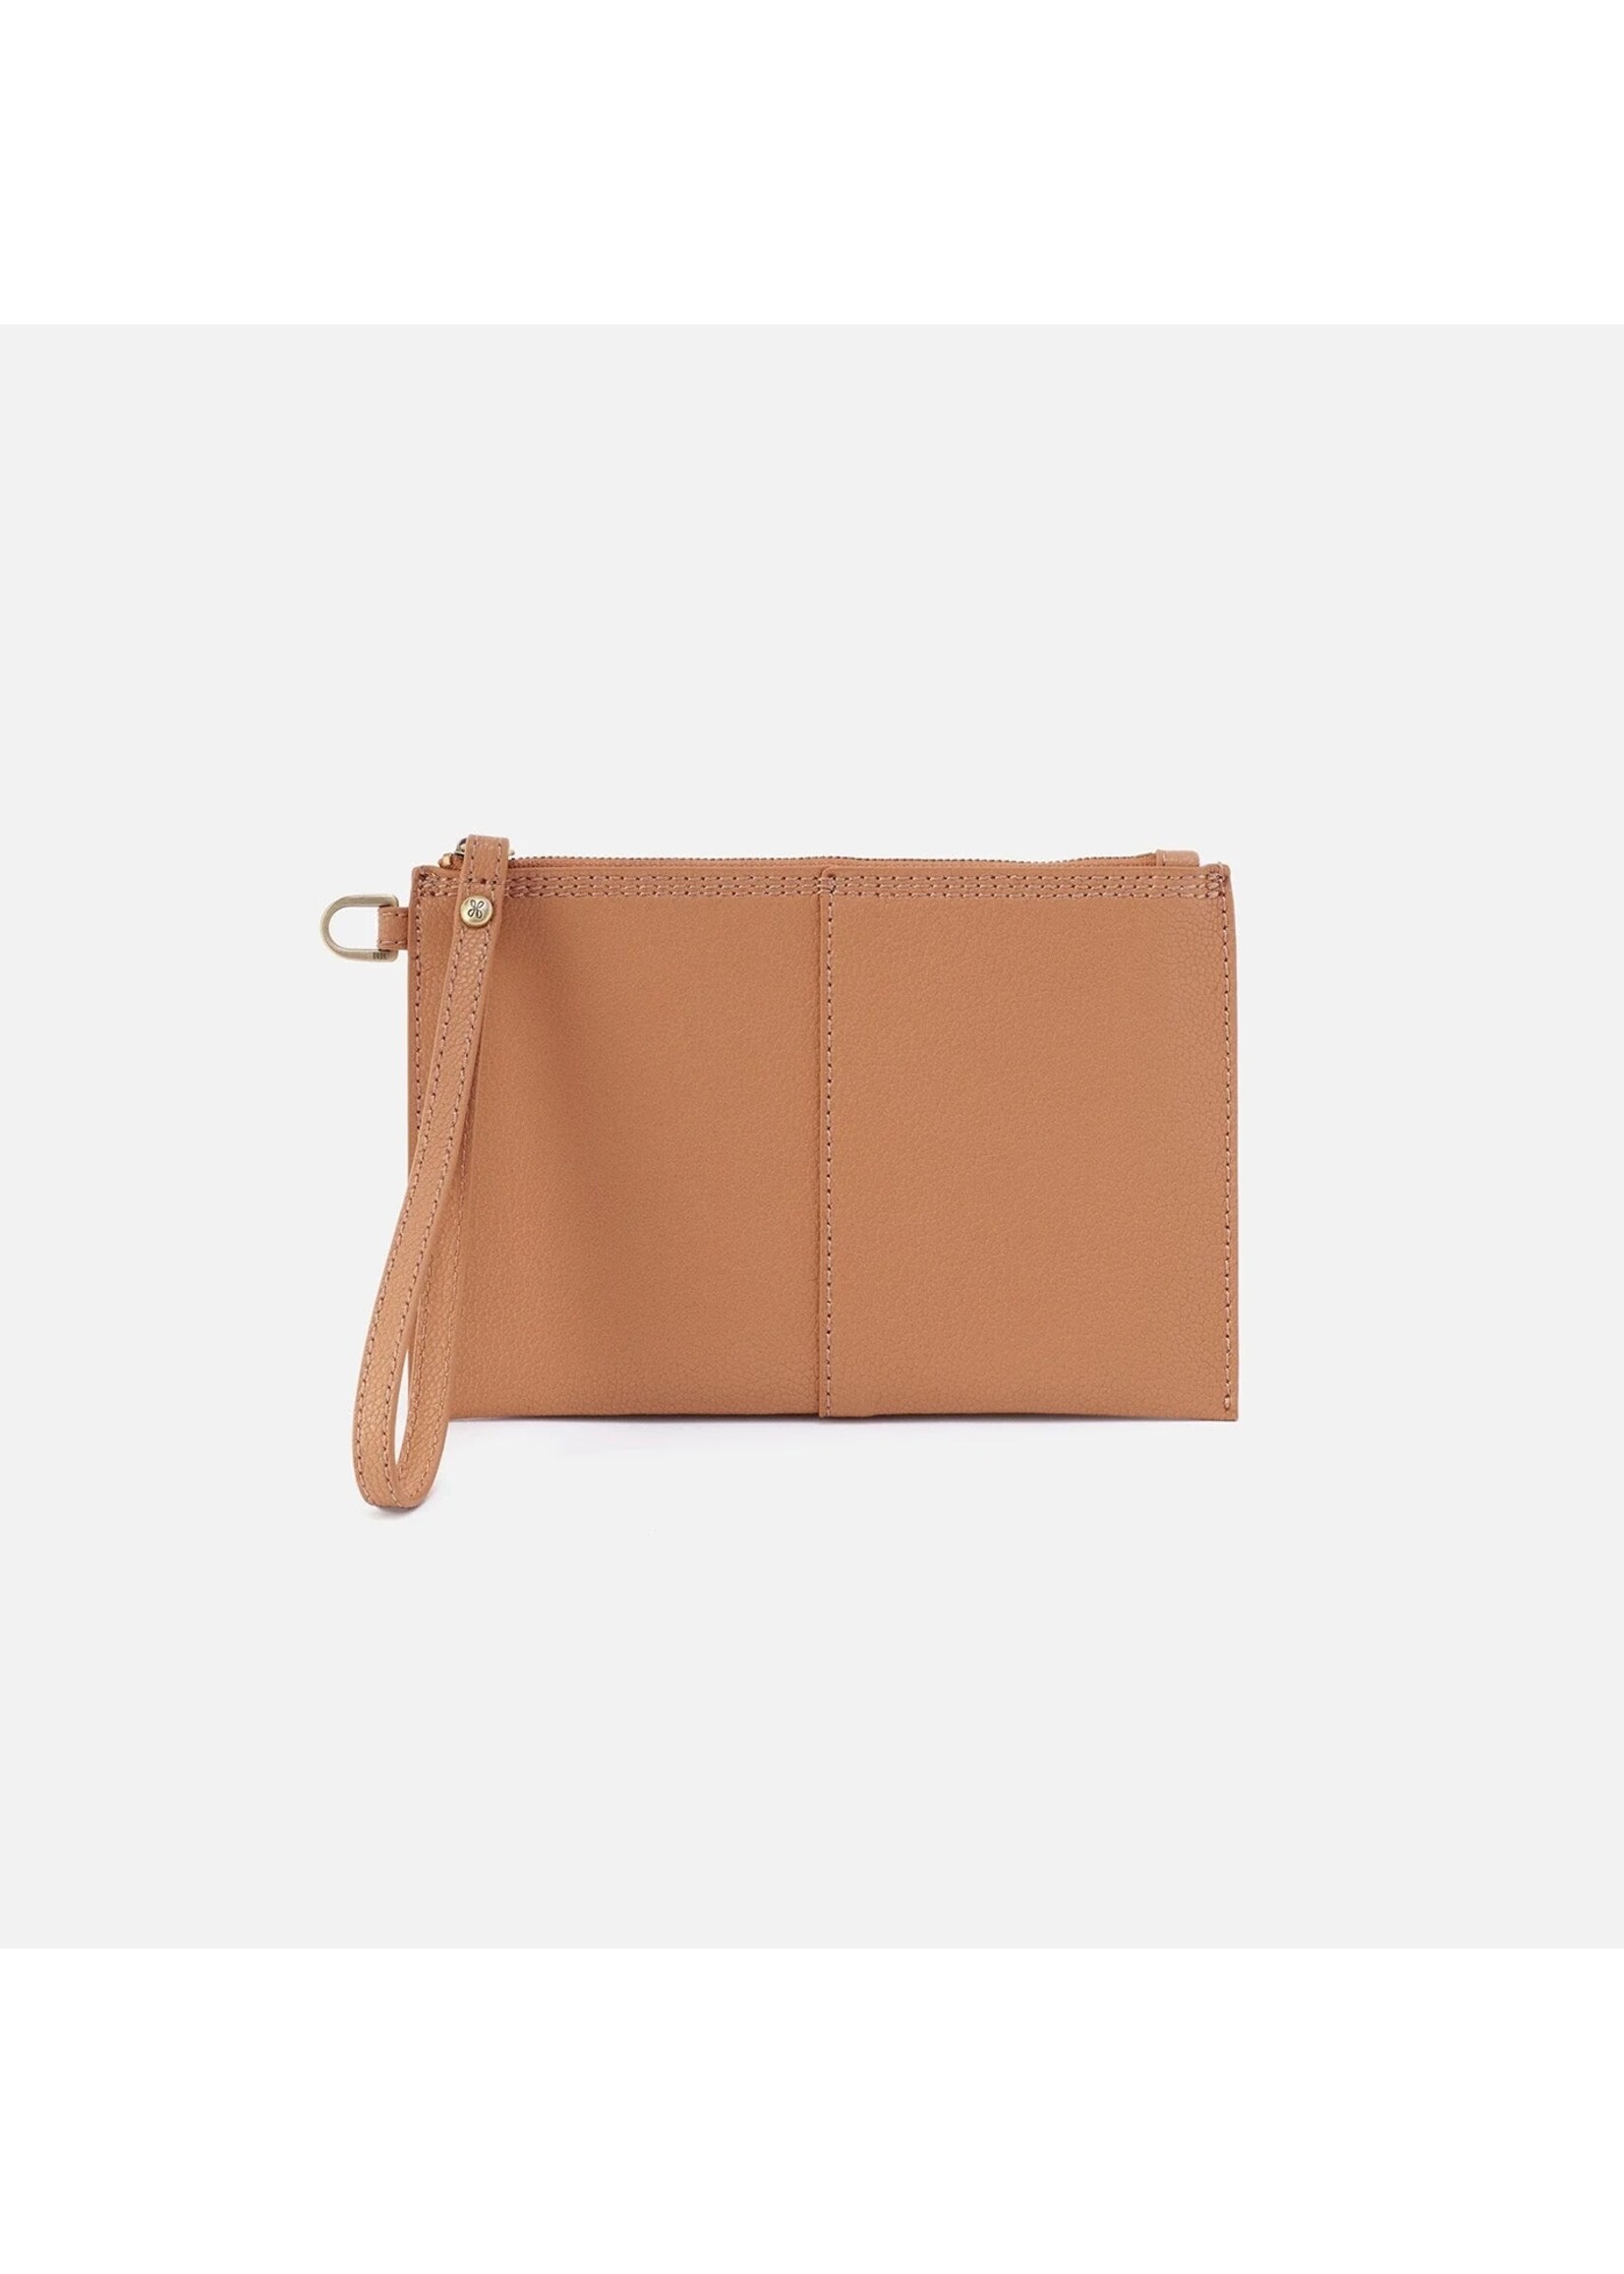 hobo Hobo Vida Small Pouch - Biscuit